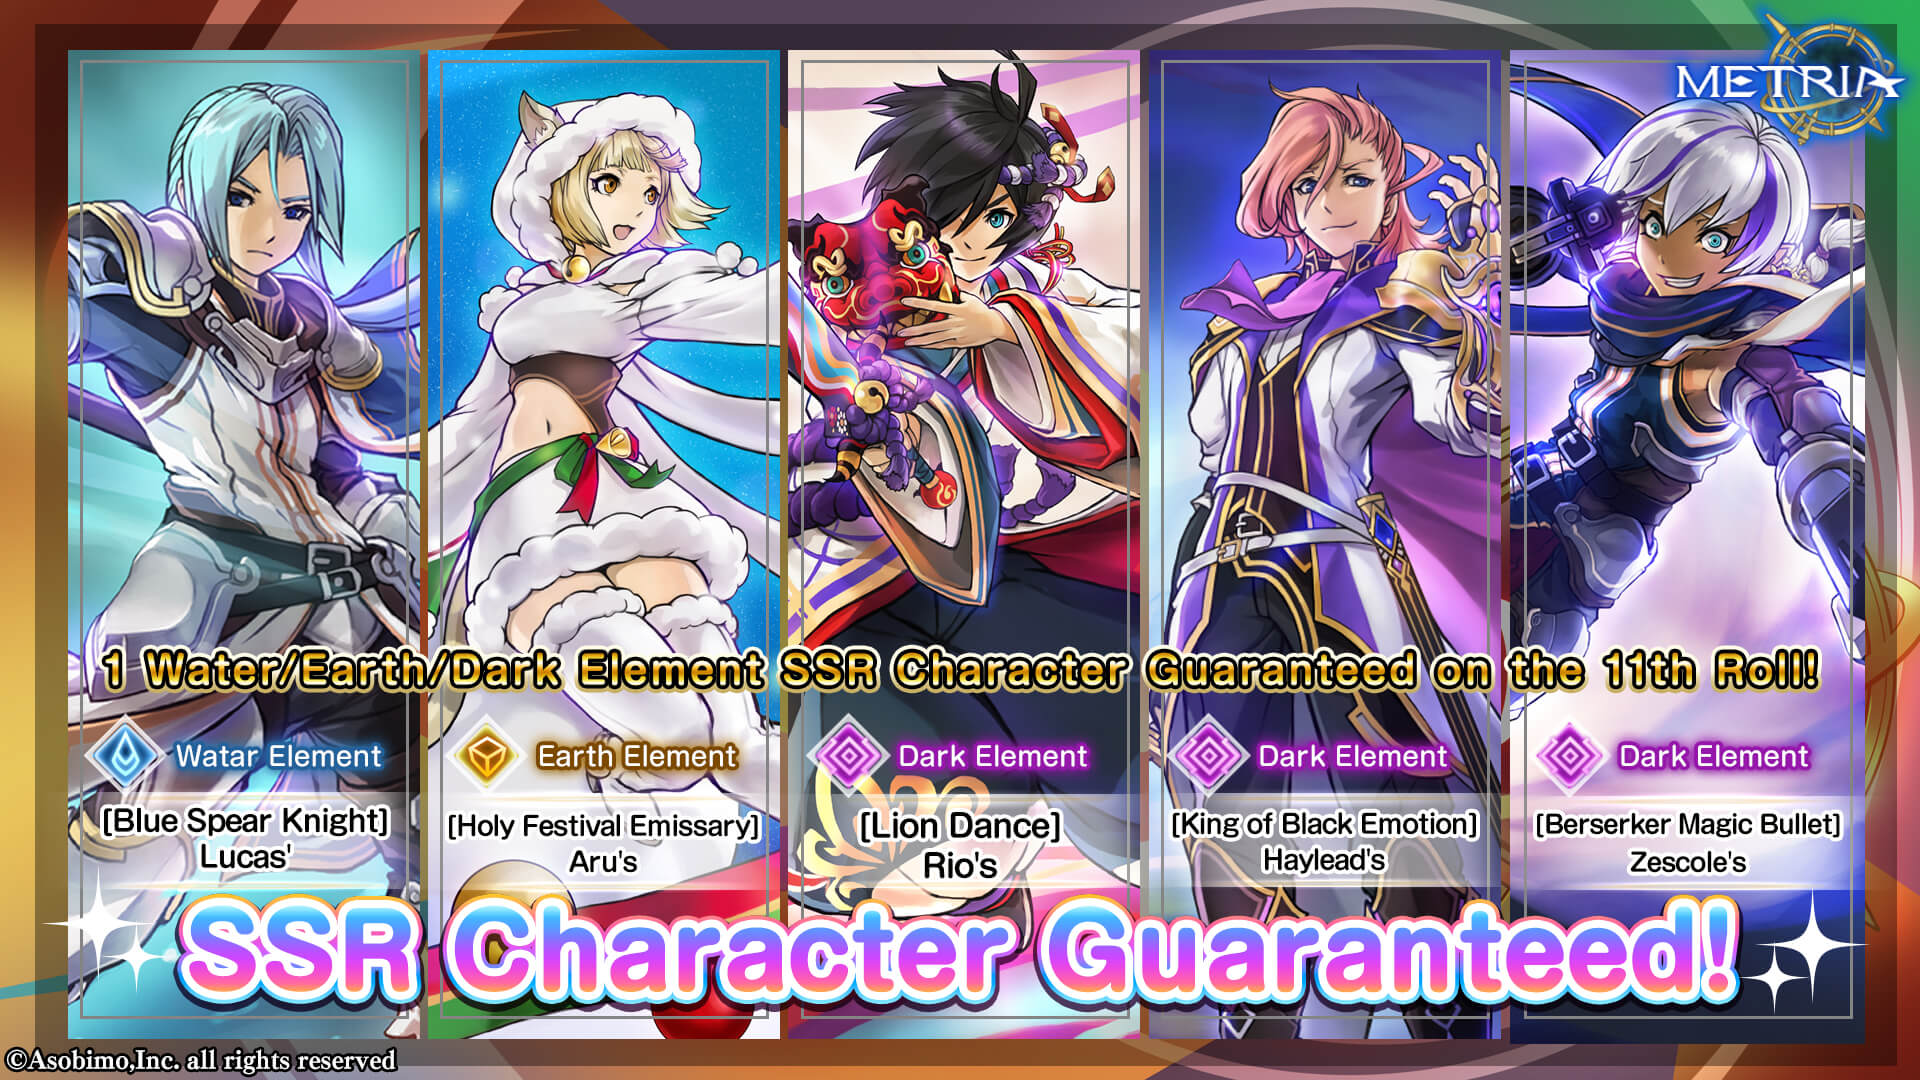 Golden Week Guaranteed SSR Character Gacha Available! Get a Water/Earth/Dark Element SSR Character for Sure! More…